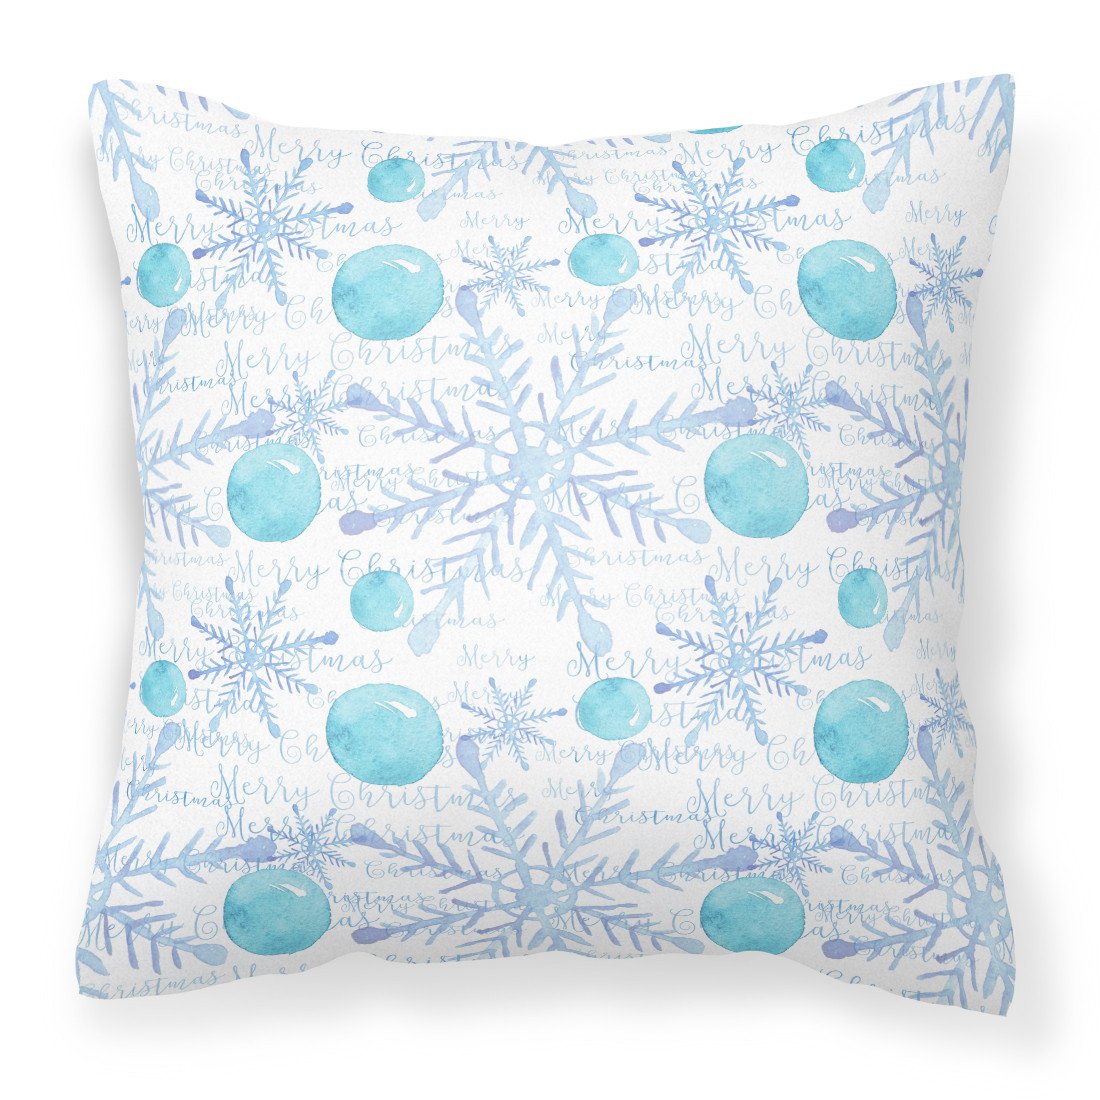 Winter Snowflakes on White Fabric Decorative Pillow BB7487PW1818 by Caroline's Treasures